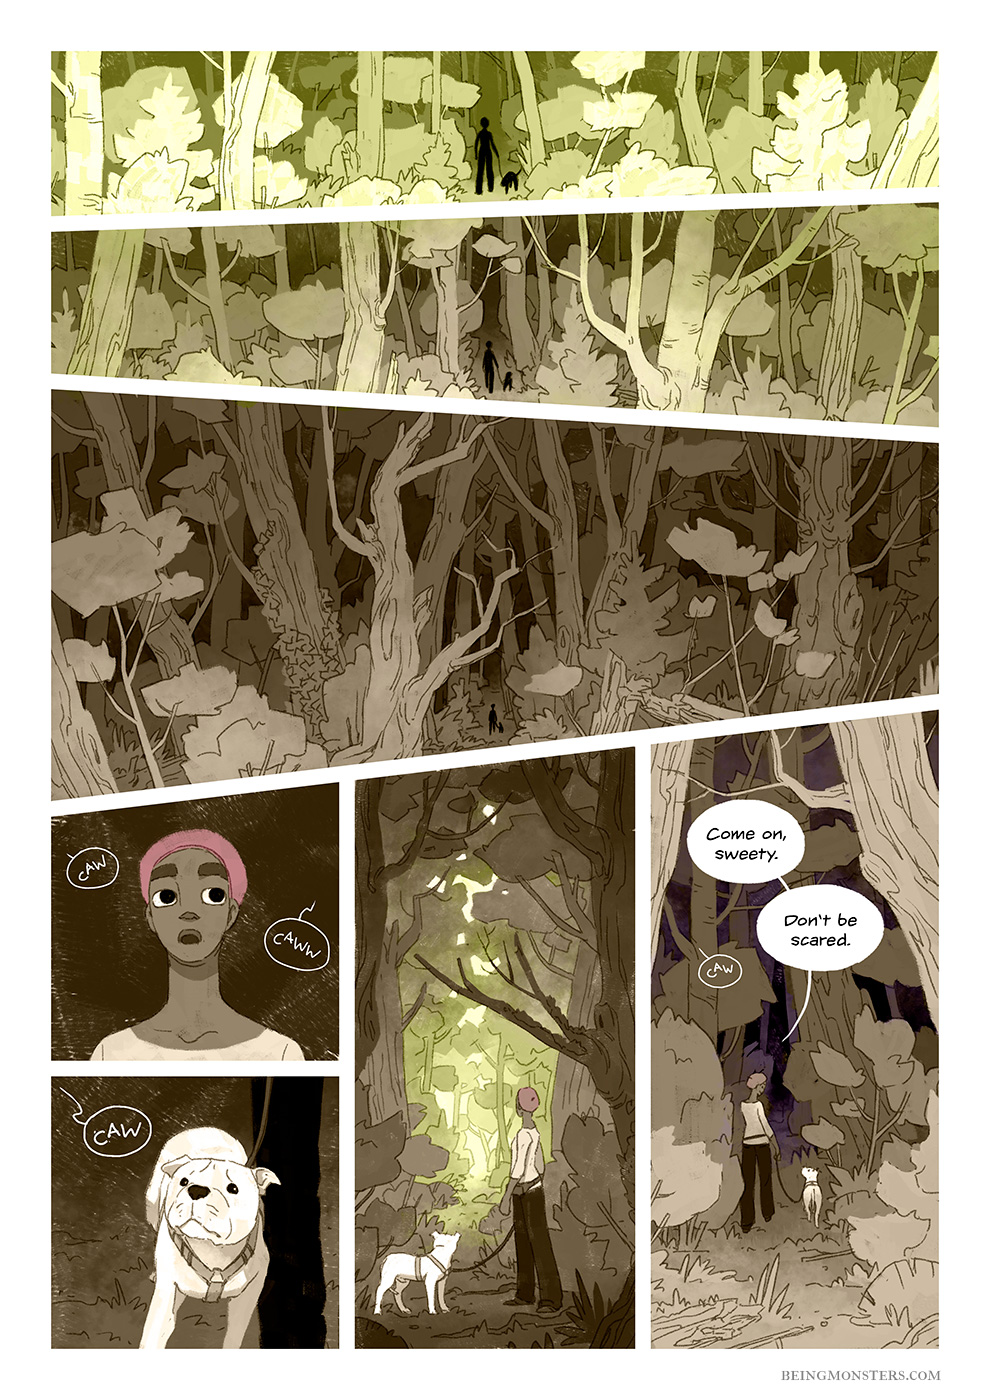 Being Monsters comic Book 1 Chapter 2 page 17 Julia Beutling